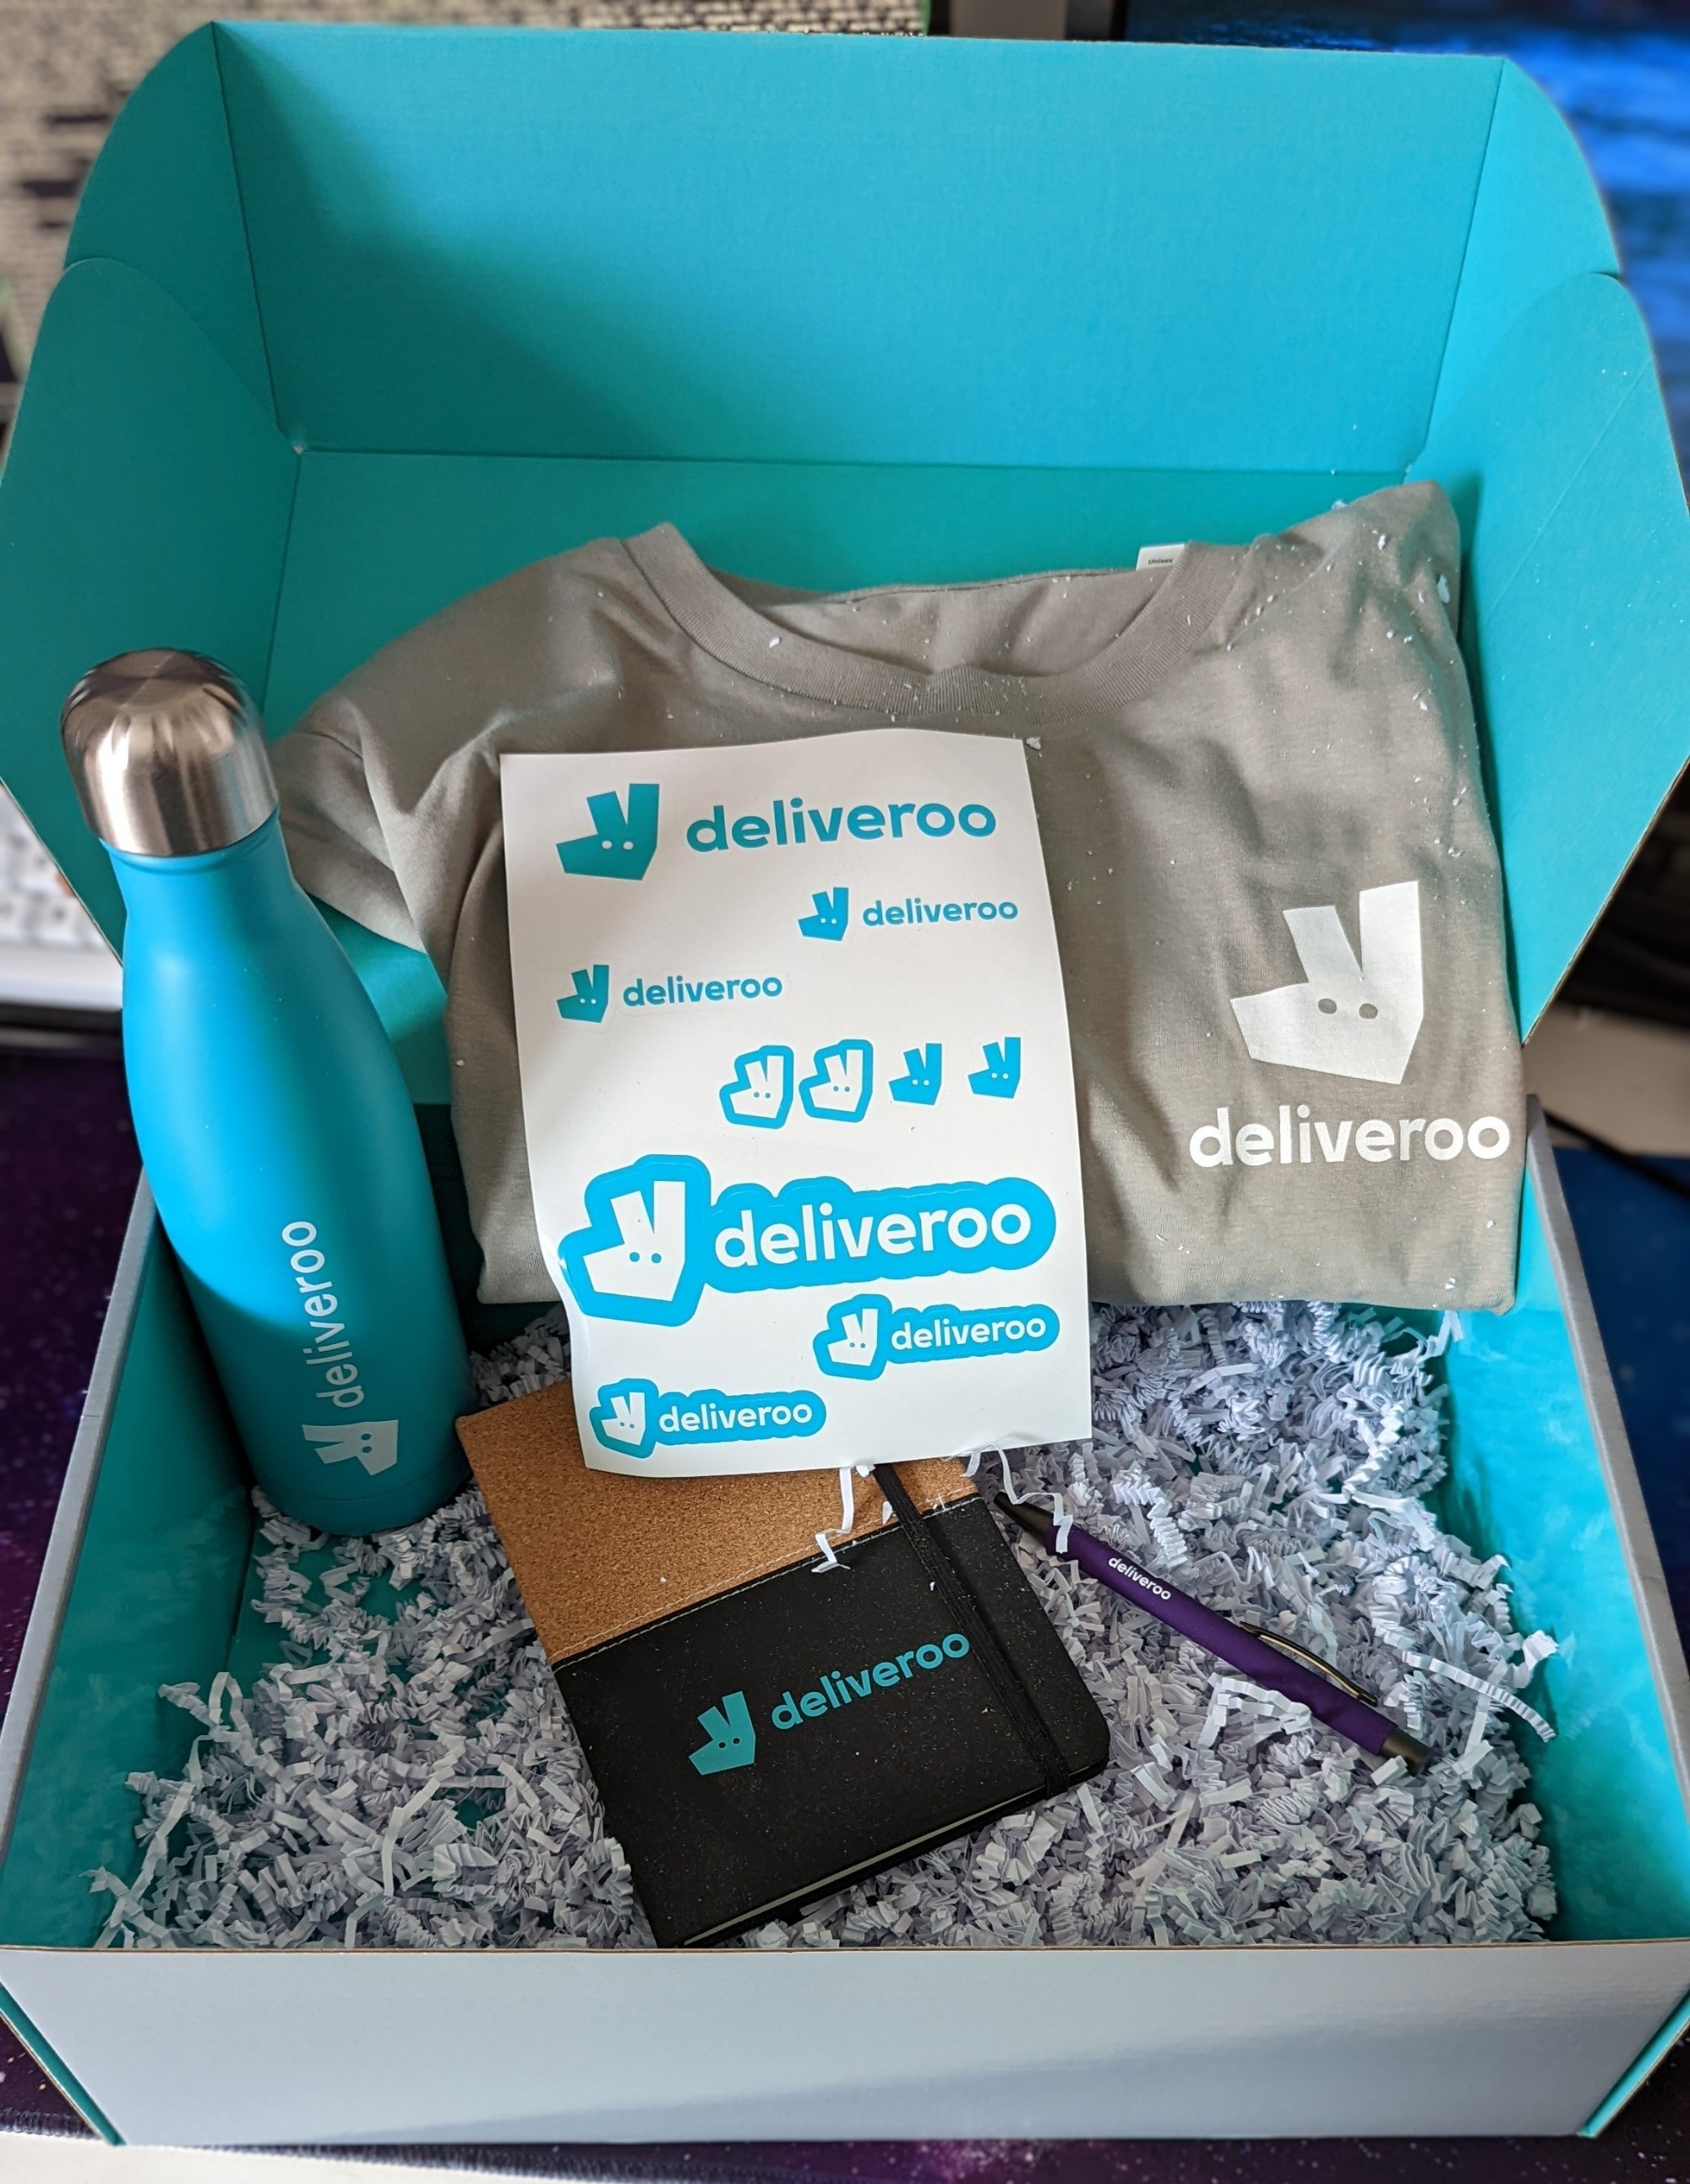 The inside of the box with all the swag visible - a water bottle in Deliveroo blue, a set of (laptop) stickers of the logo and name, a Cork and black notebook, a pen, and a Deliveroo brown t-shirt